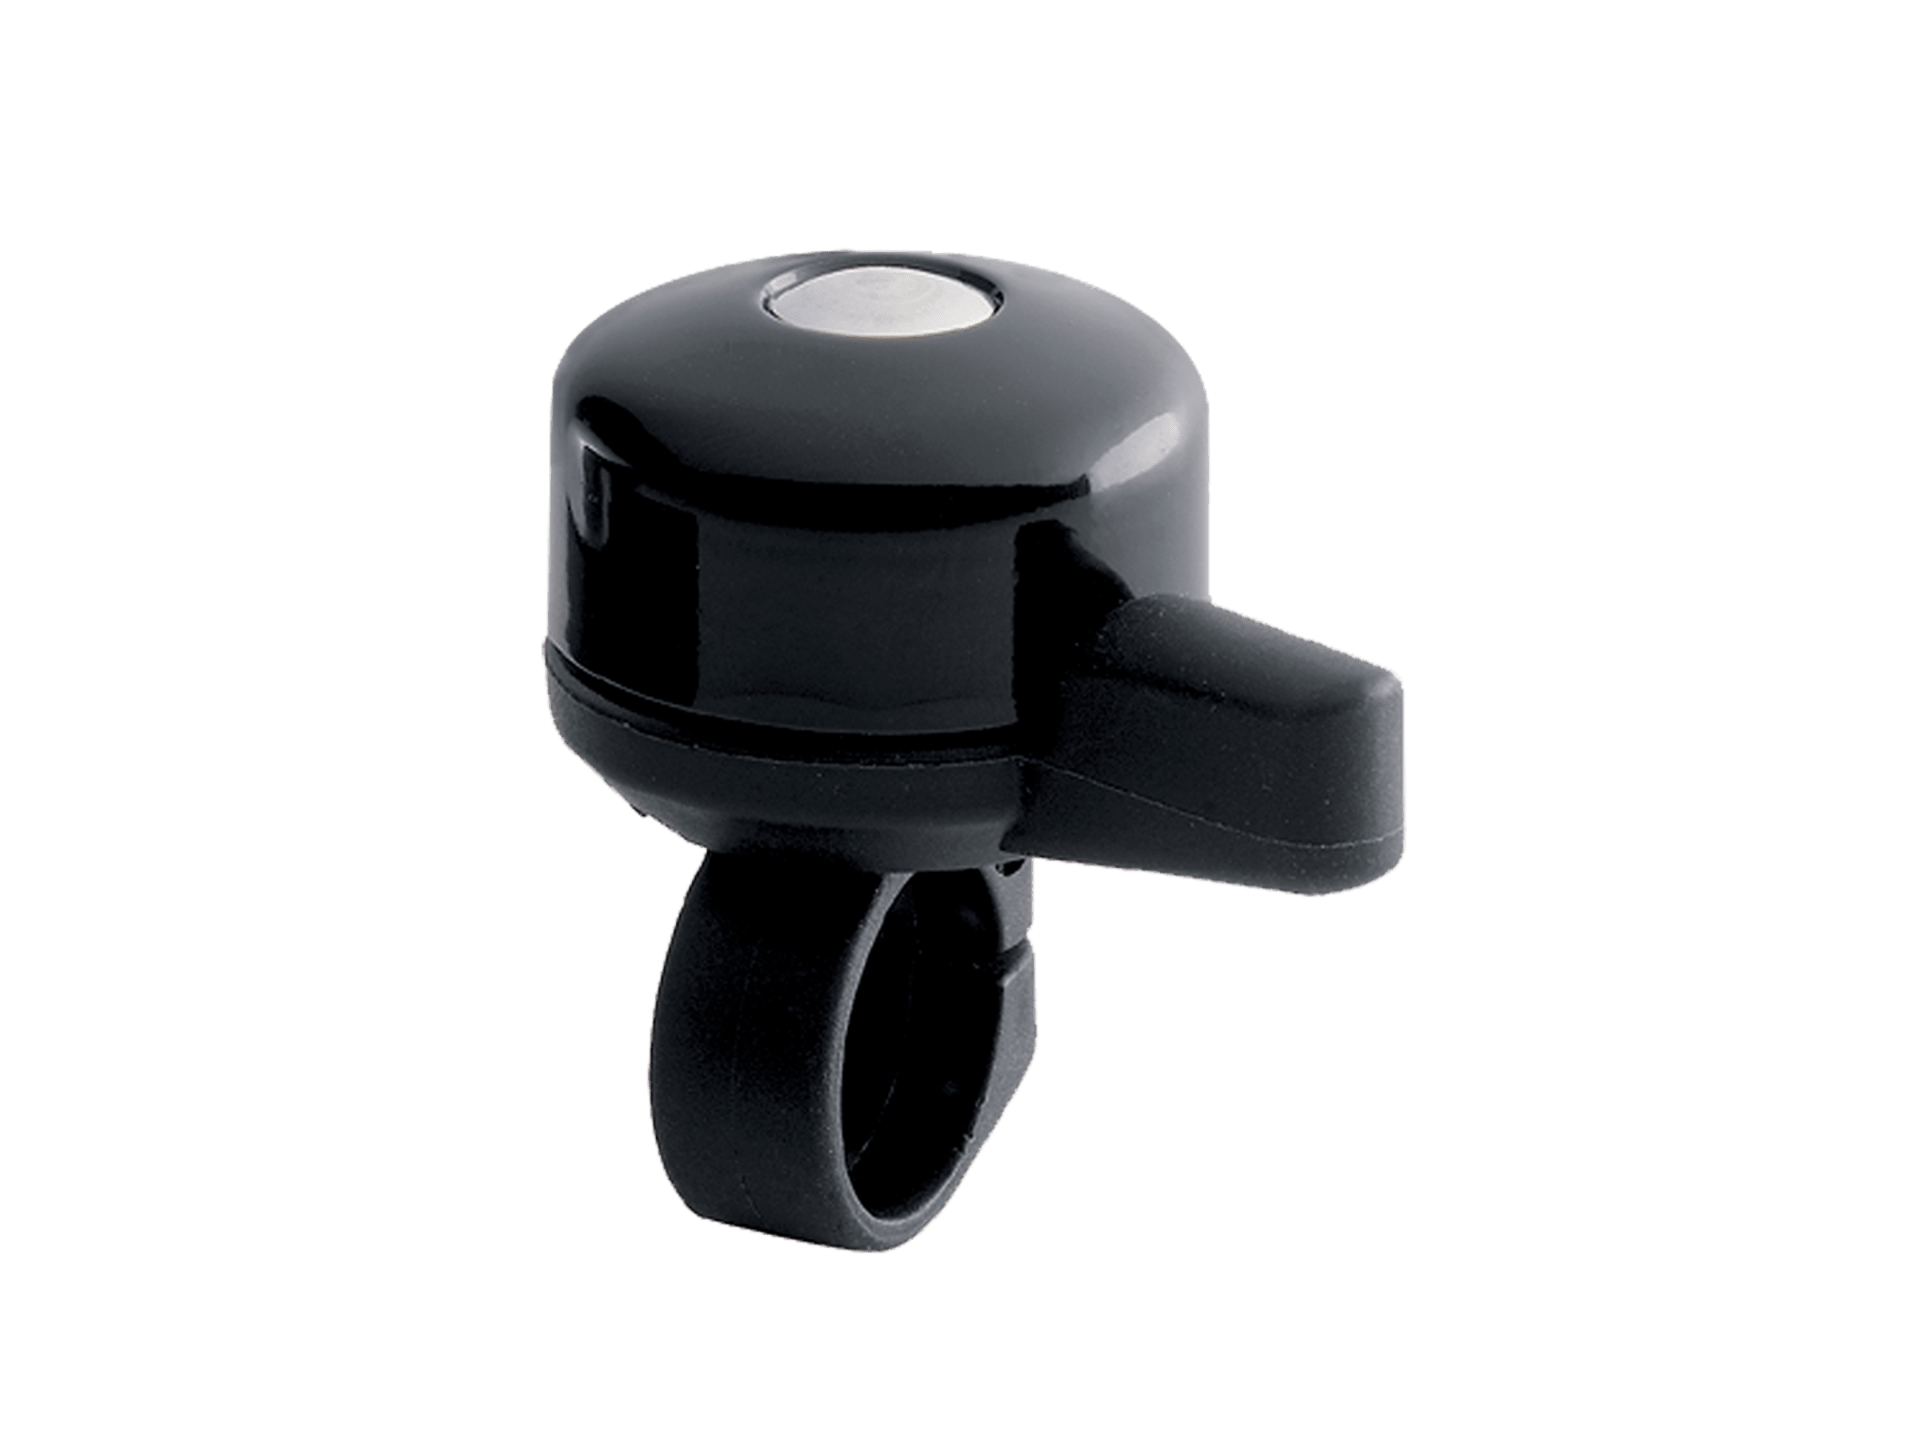 Mirrycle Incredibell Clever Lever Bike Bell